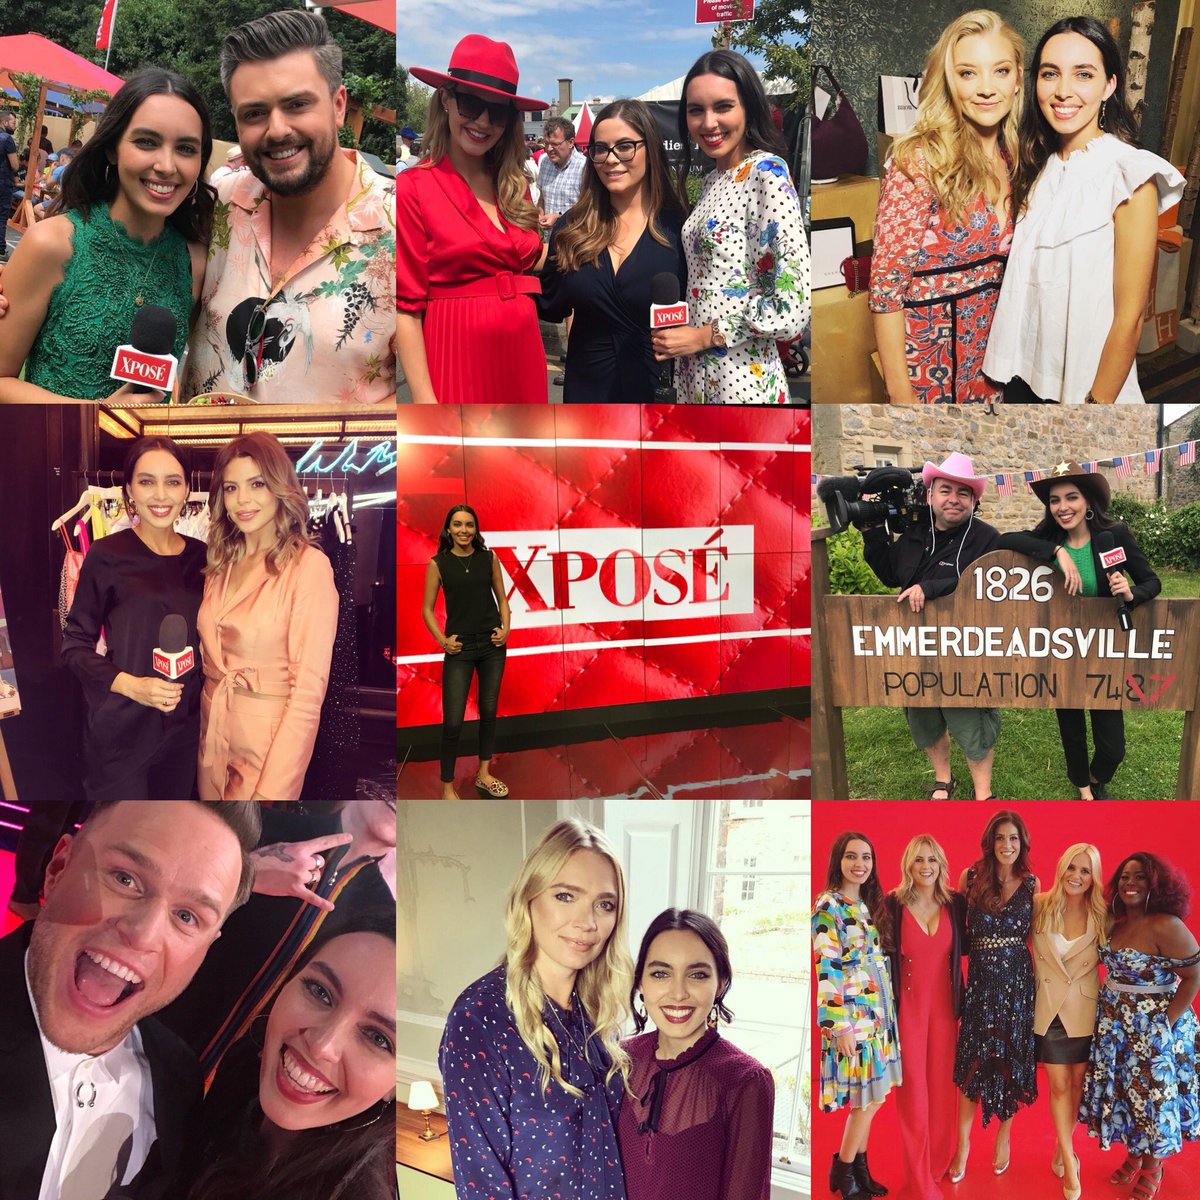 An incredibly sad but equally amazing day as I reflect back on the unbelievable year and a half I had with @Xpose. Tonight is the very last show, and I cant thank the production team enough for taking the chance on me! So many amazing memories- Onwards and upwards ❤️